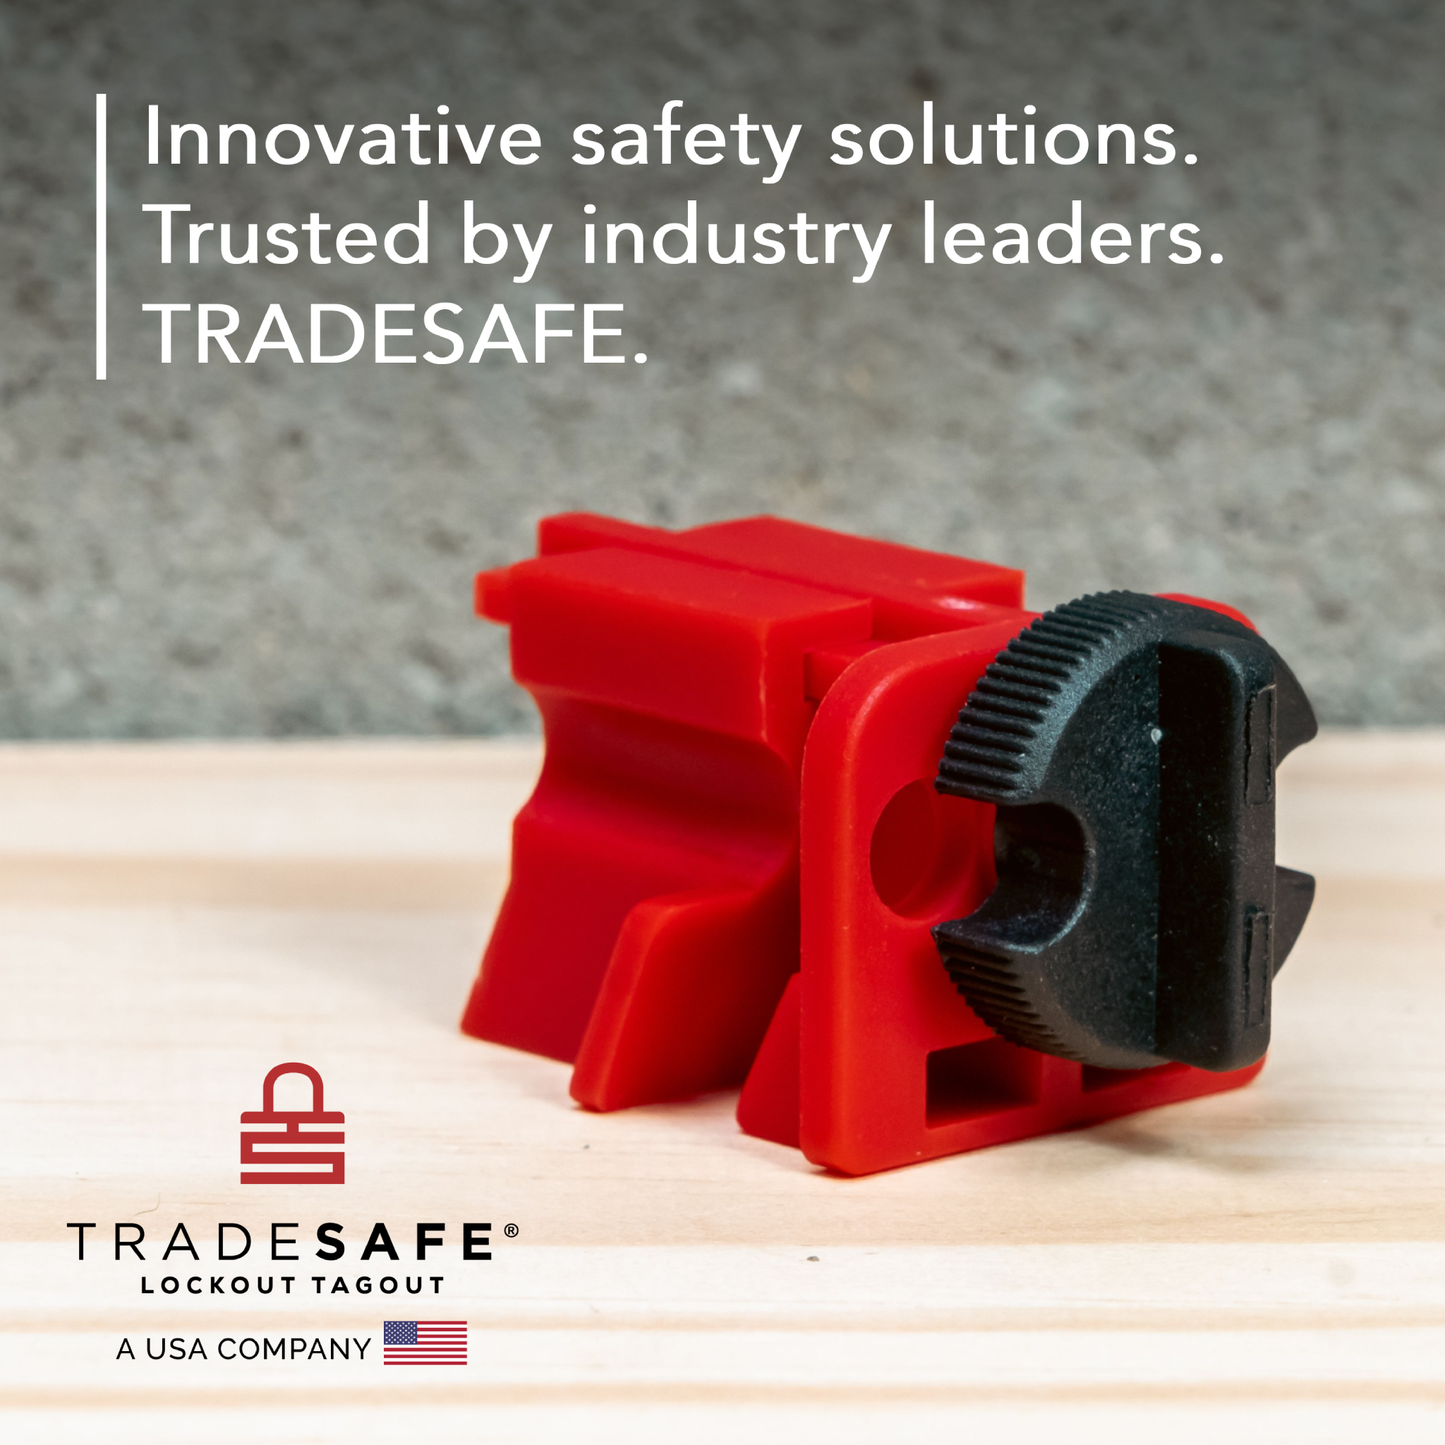 branding image of universal breaker lock with text innovative safety solutions trusted by industry leaders tradesafe